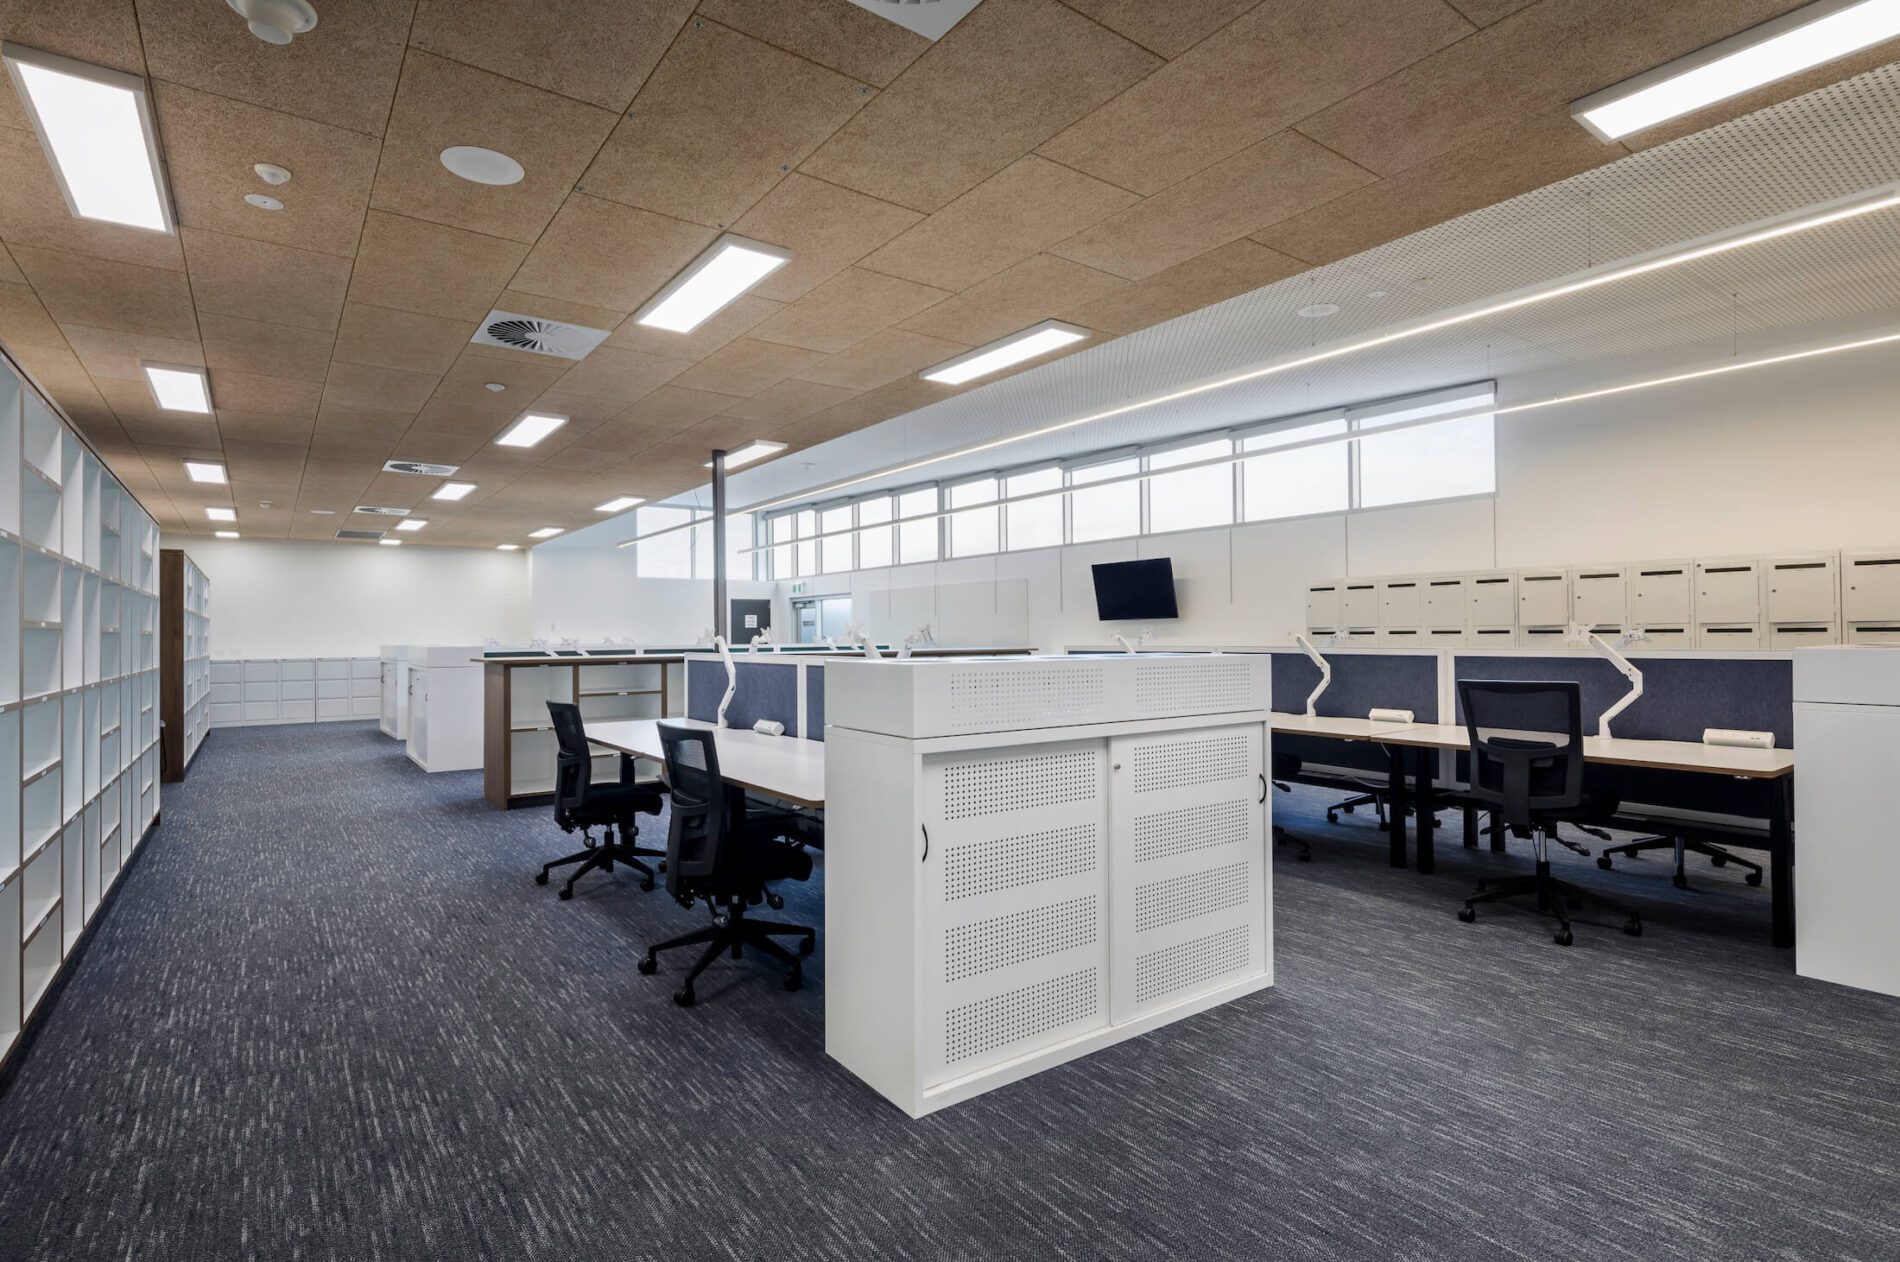 Office space with desks, acoustic ceiling and perforated cabinetry, pigeonholes